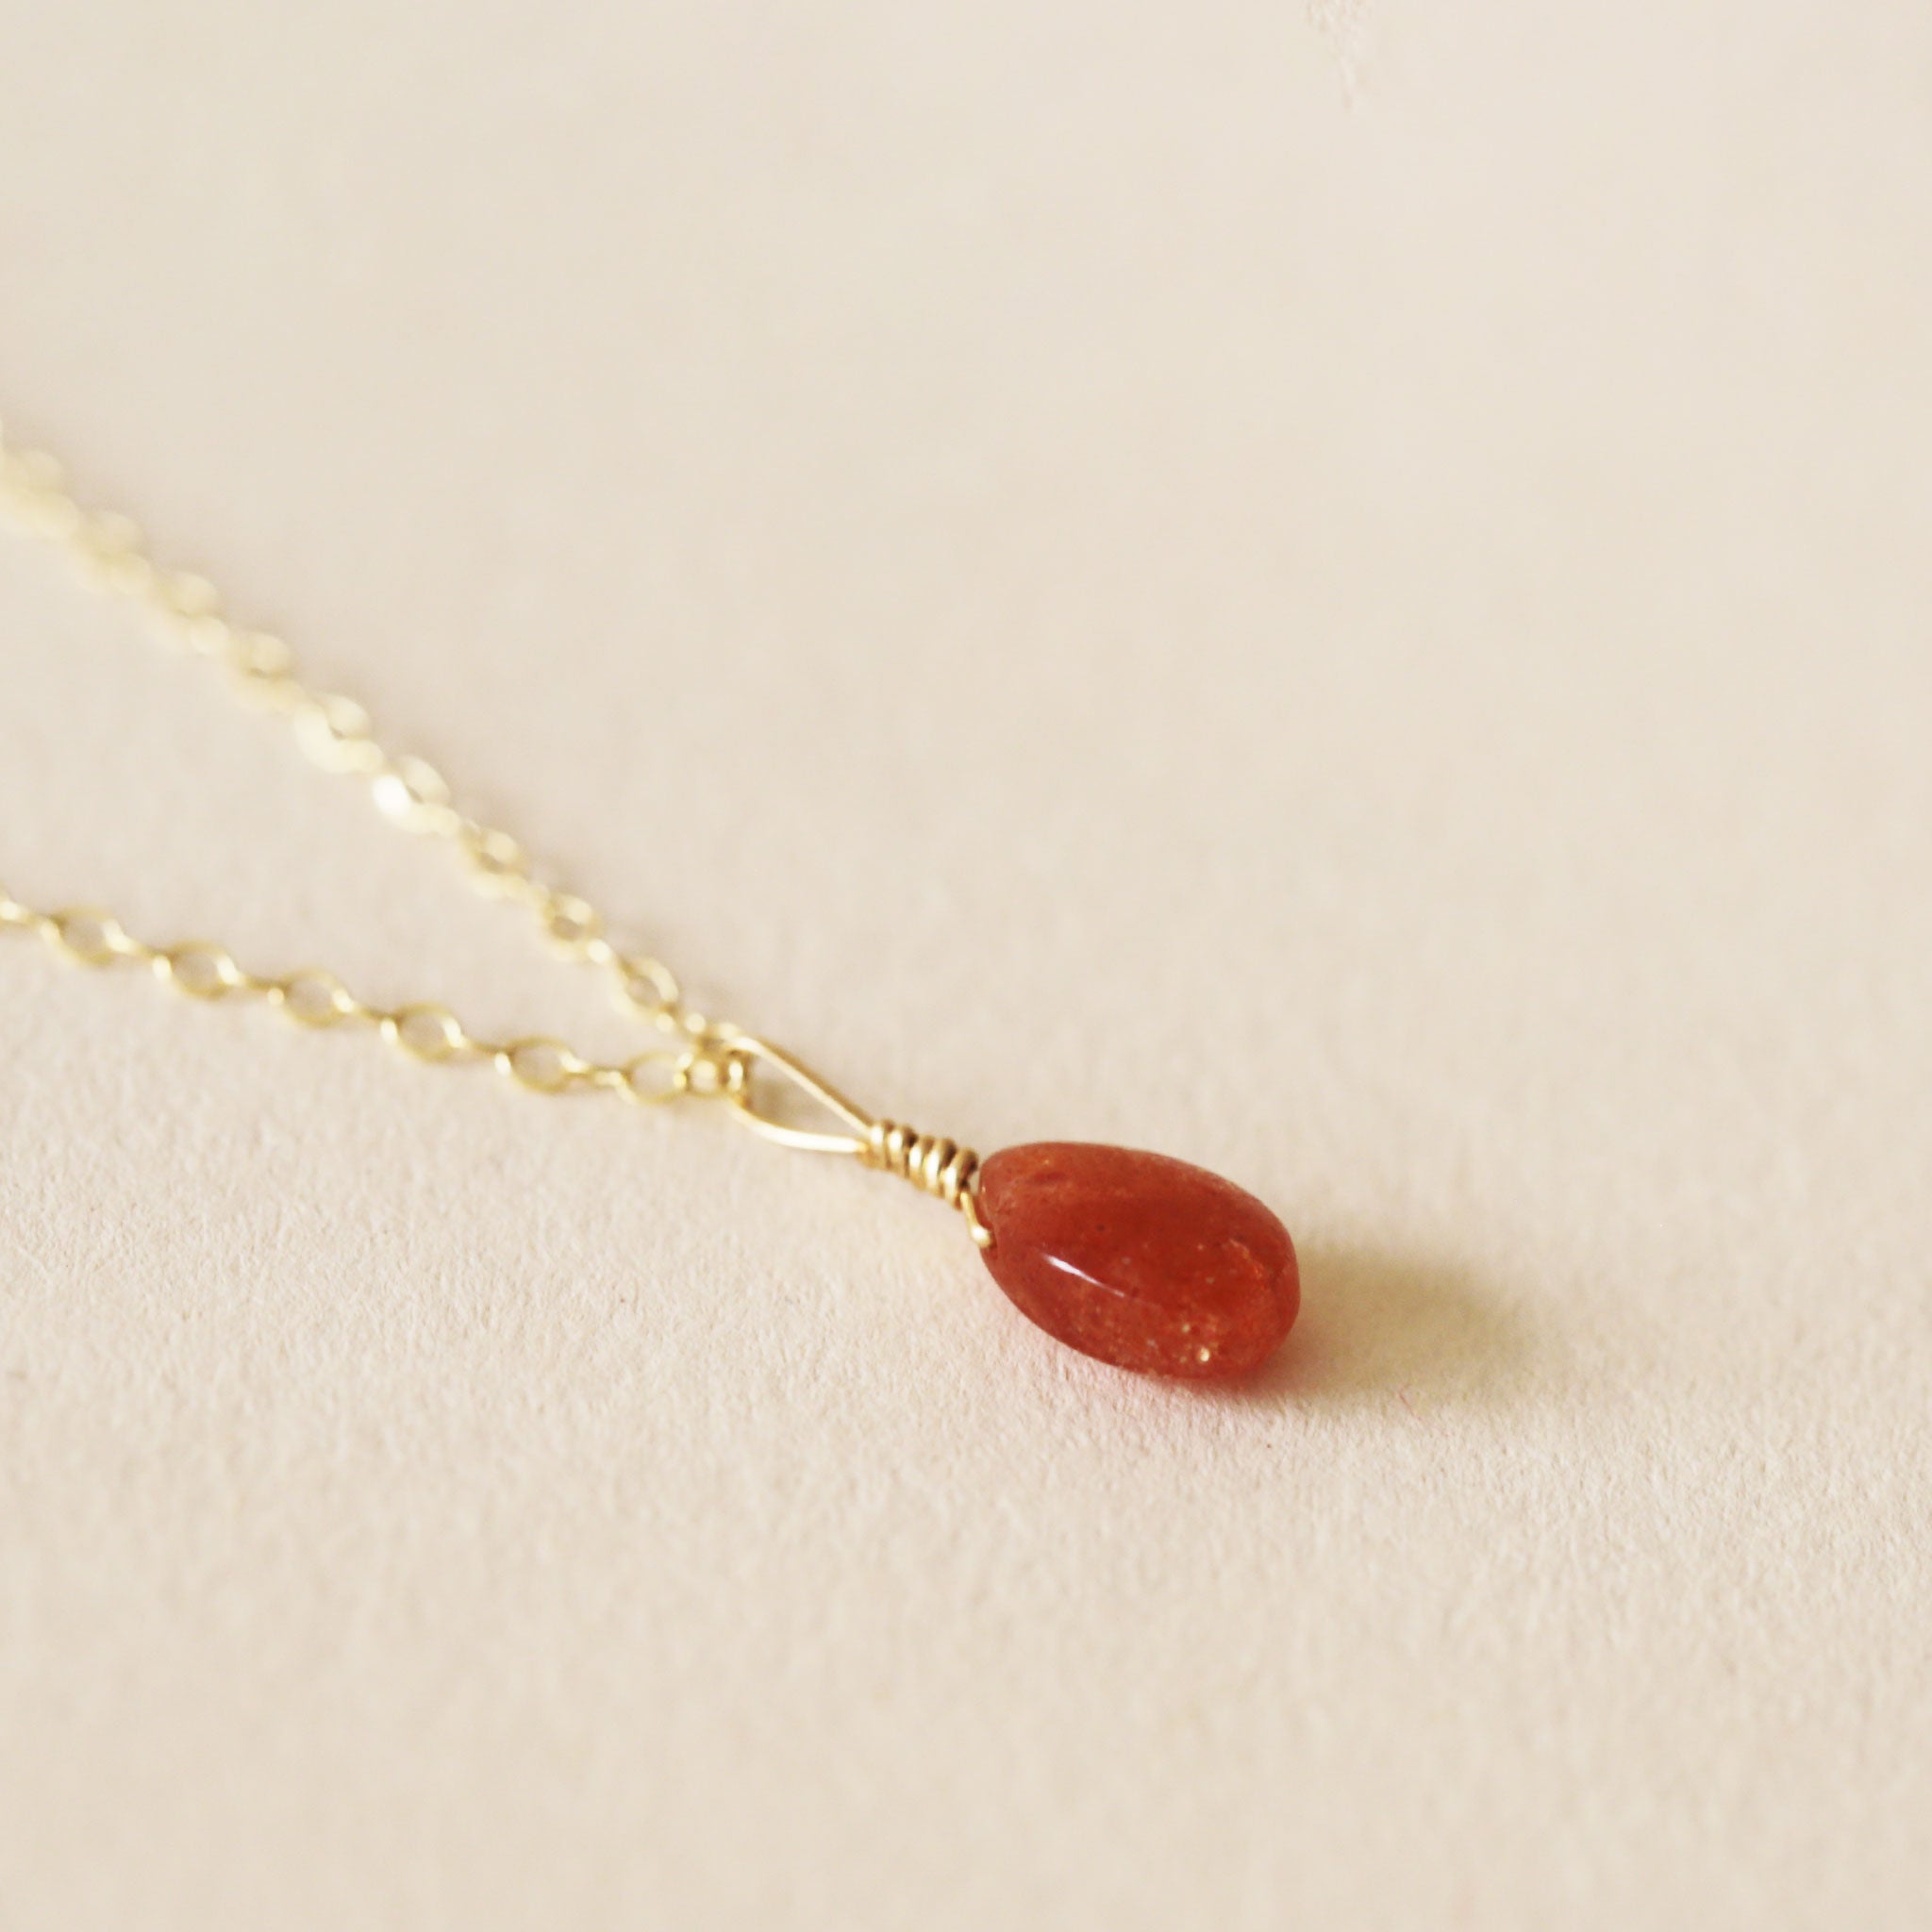 On a neutral background is a gold chain necklace with an orange/red Sunstone stone in the center.